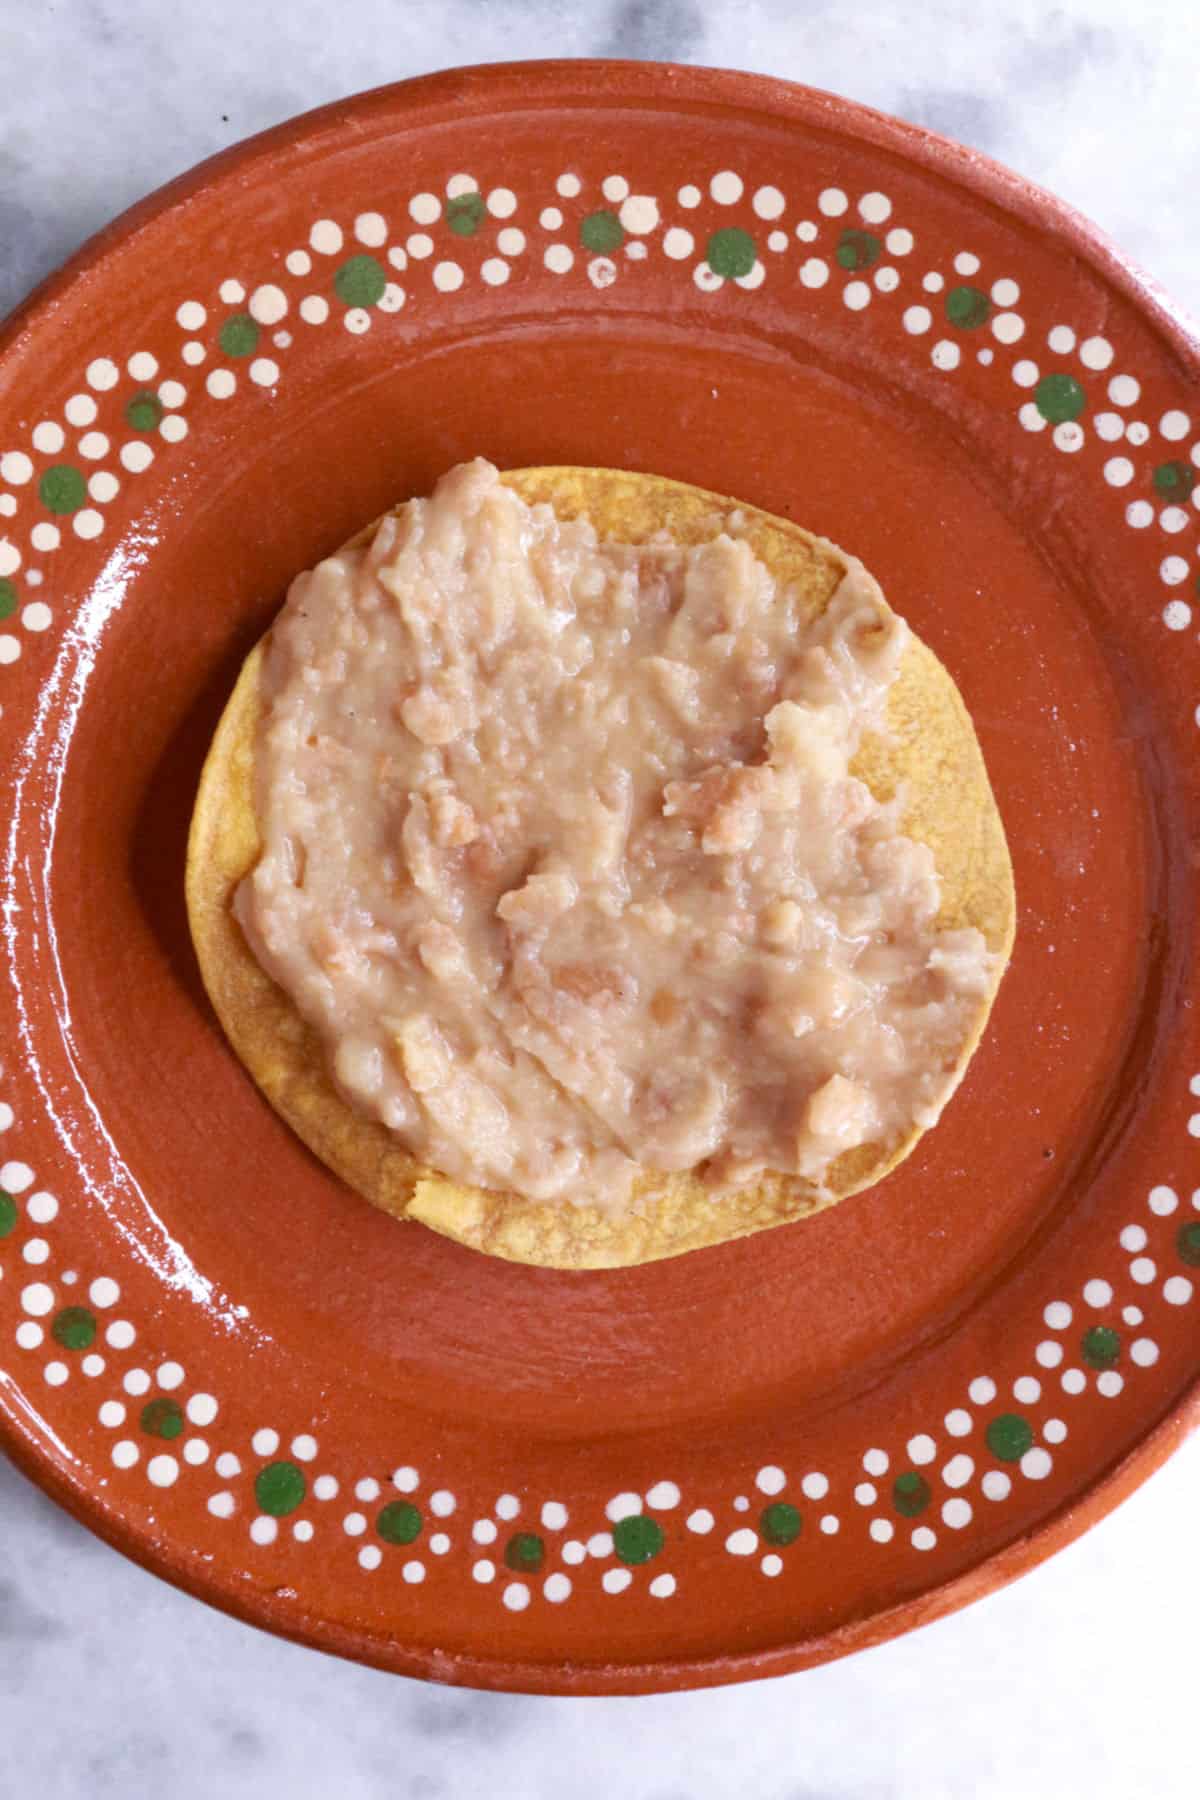 Tostada with a layer of refried beans